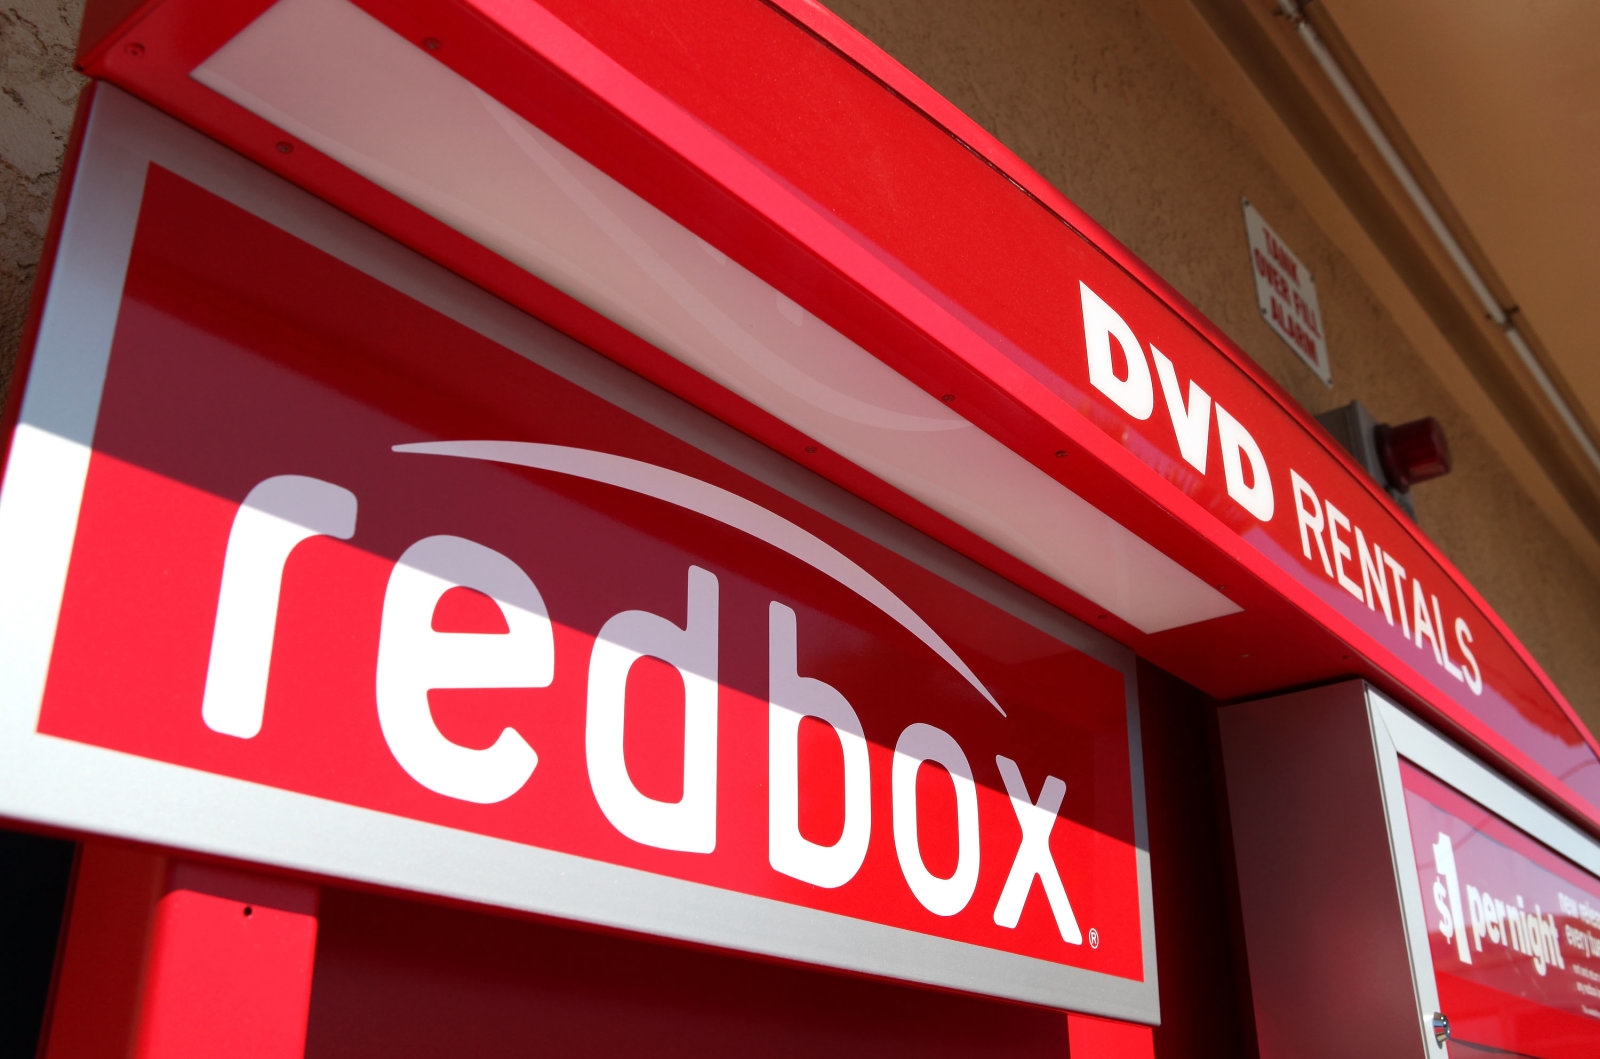 Redbox says Disney lawsuit is a baseless attempt to stamp out rivals | DeviceDaily.com